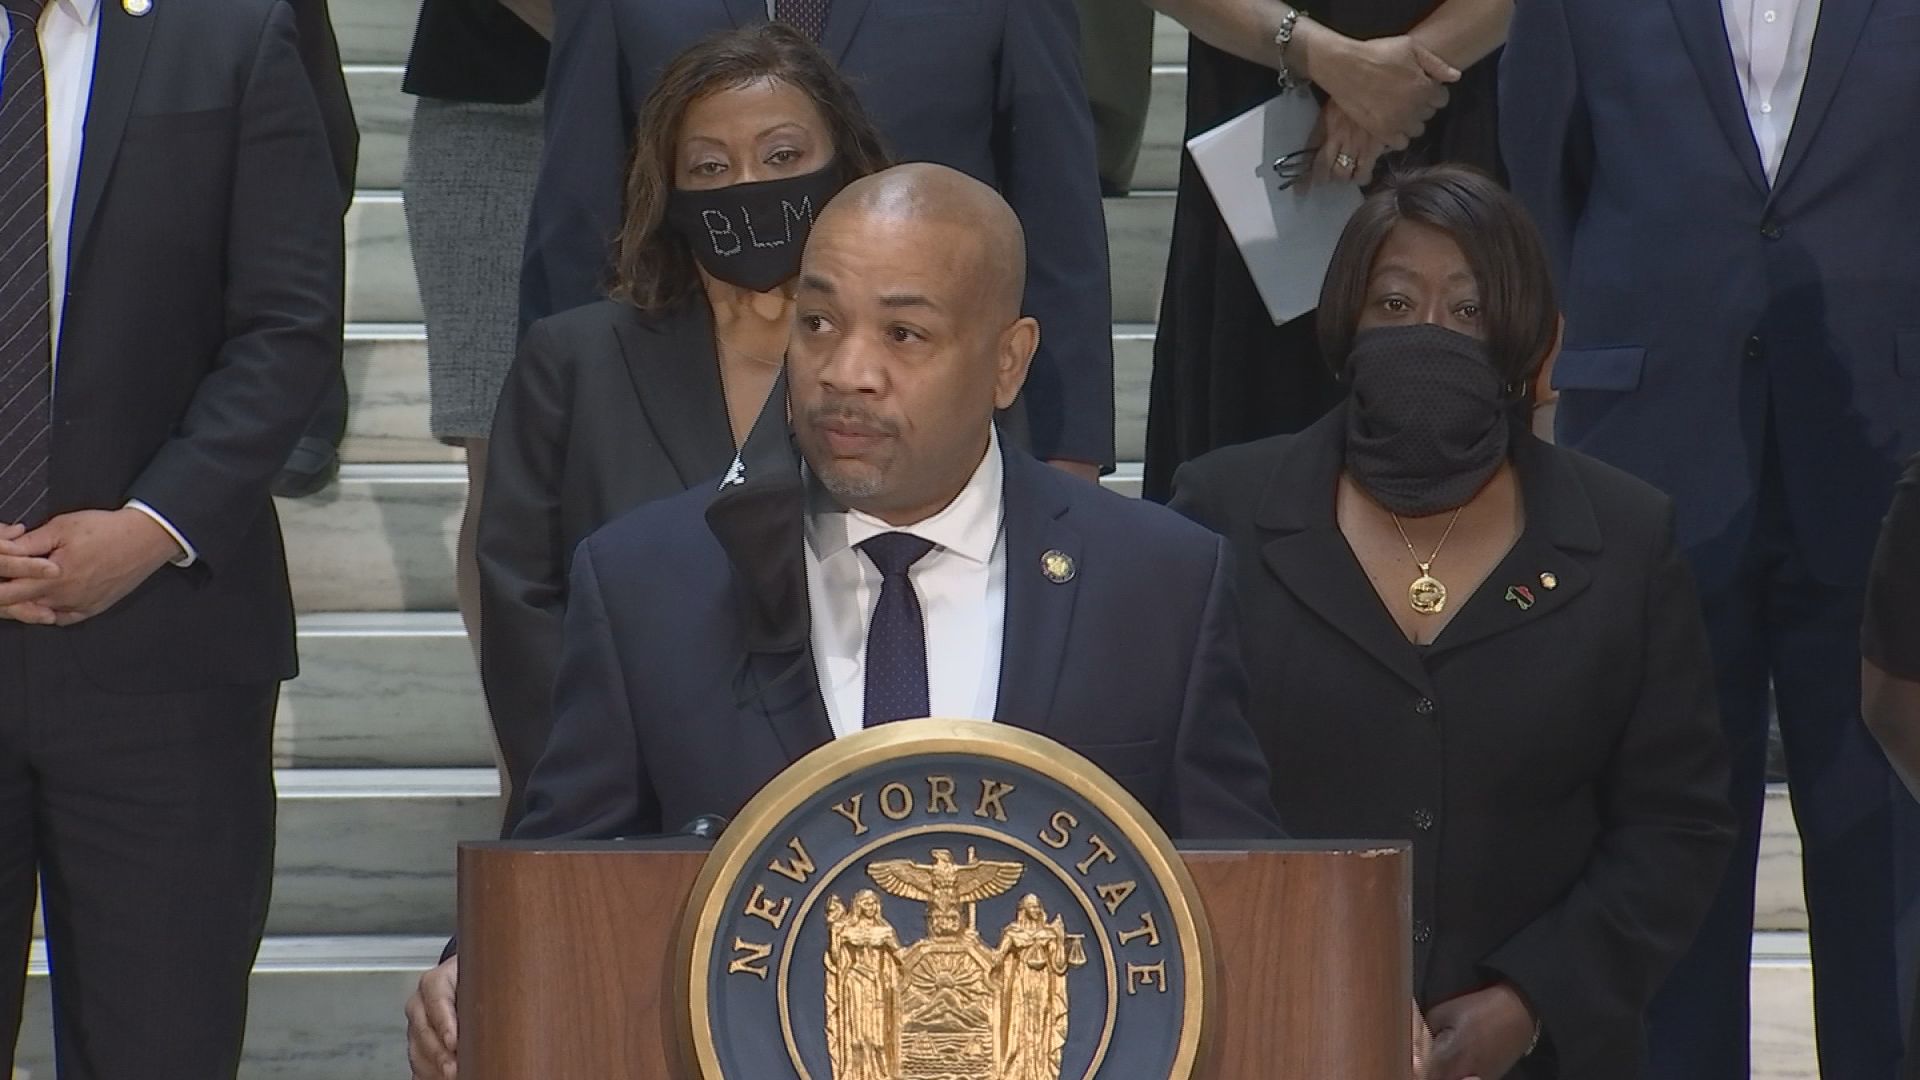 Speaker Carl Heastie holds press conference on legislation to protect New Yorkers and bring transparency and accountability to the criminal justice system